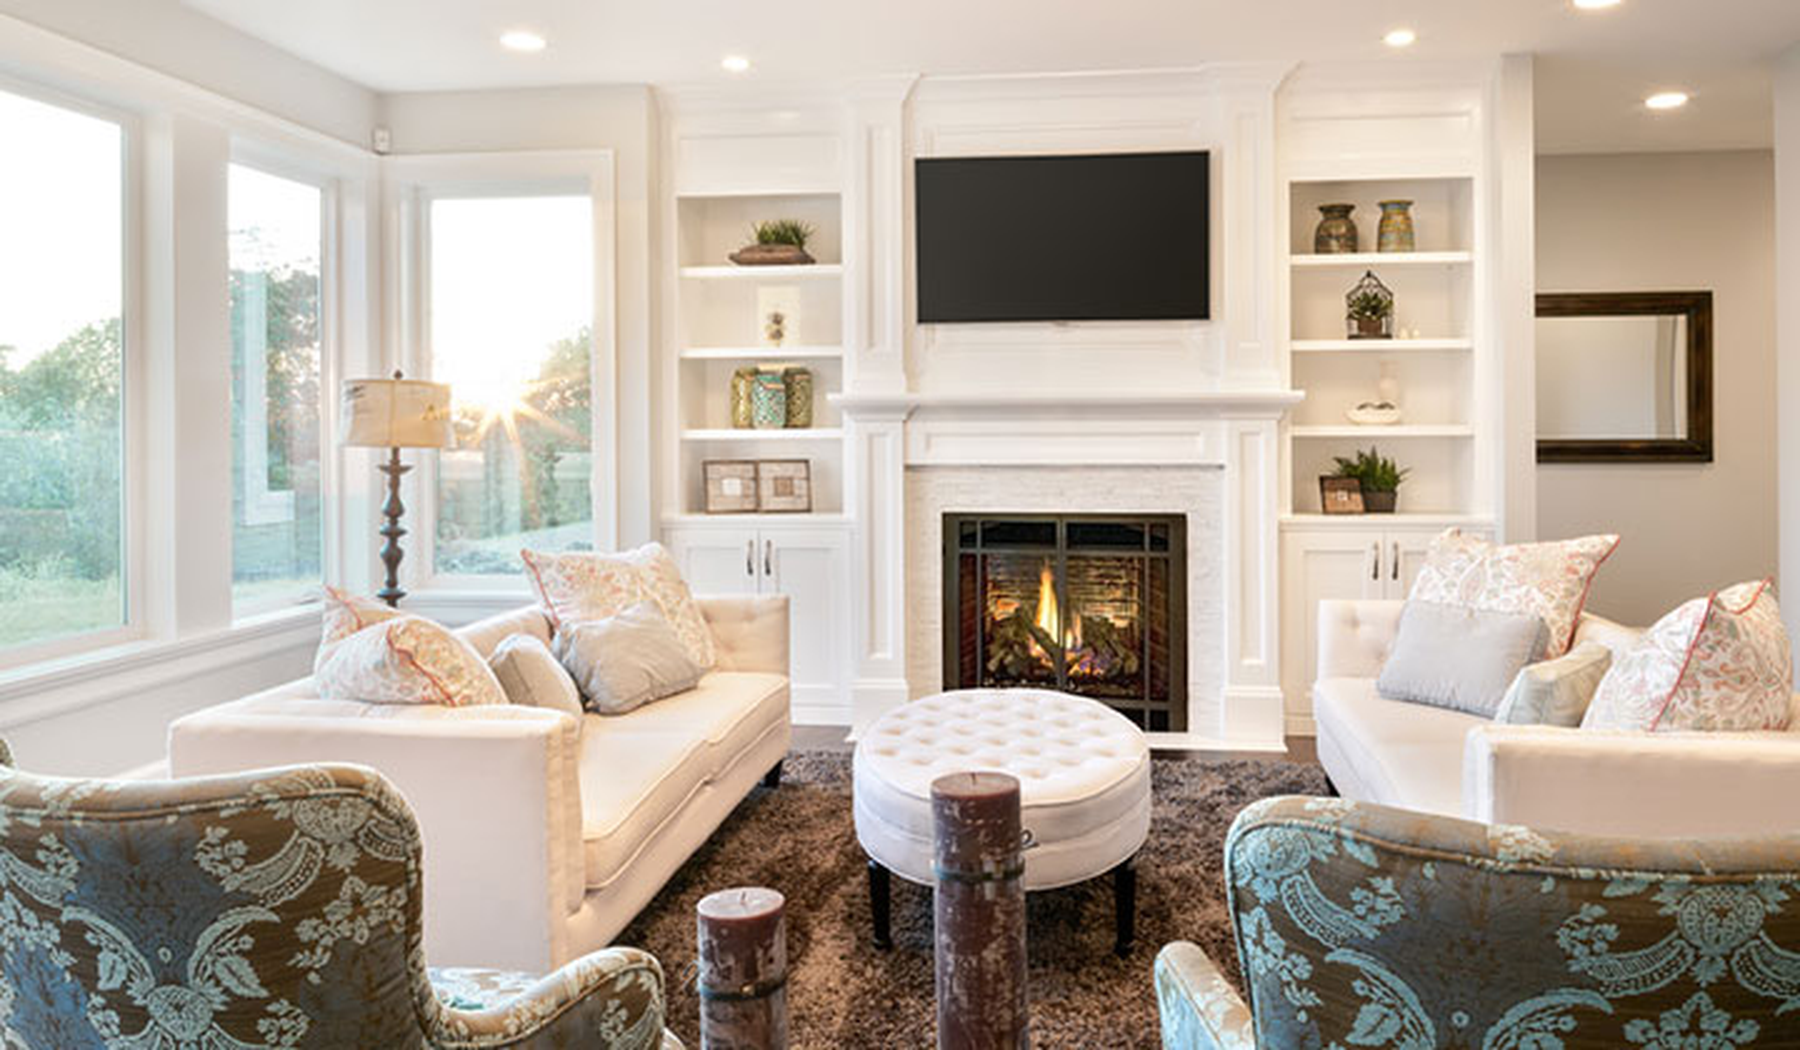 Traditional living room furniture in light colors with fireplace